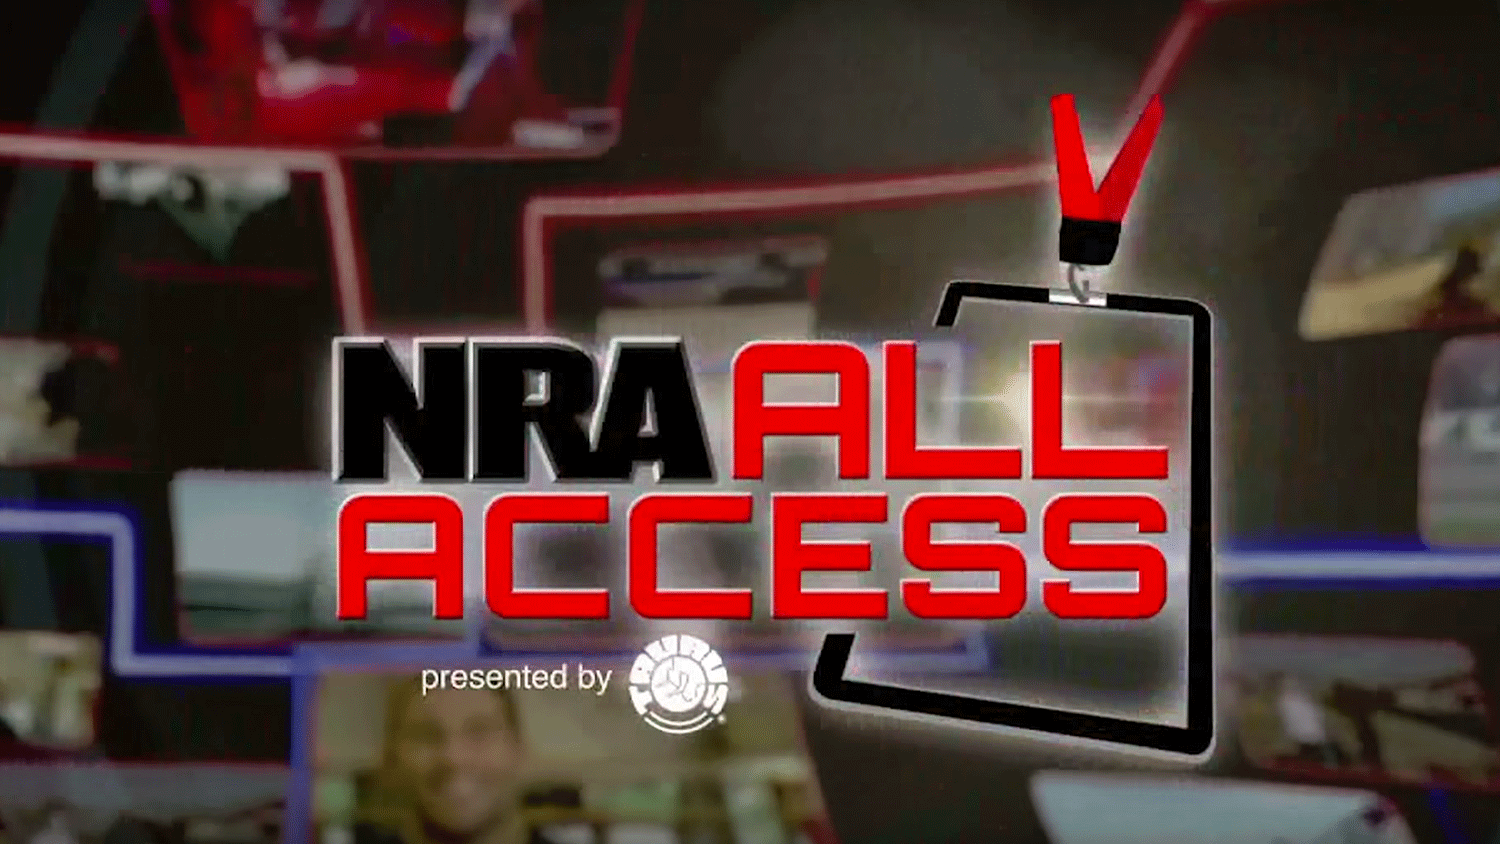 Next Week on NRA All Access